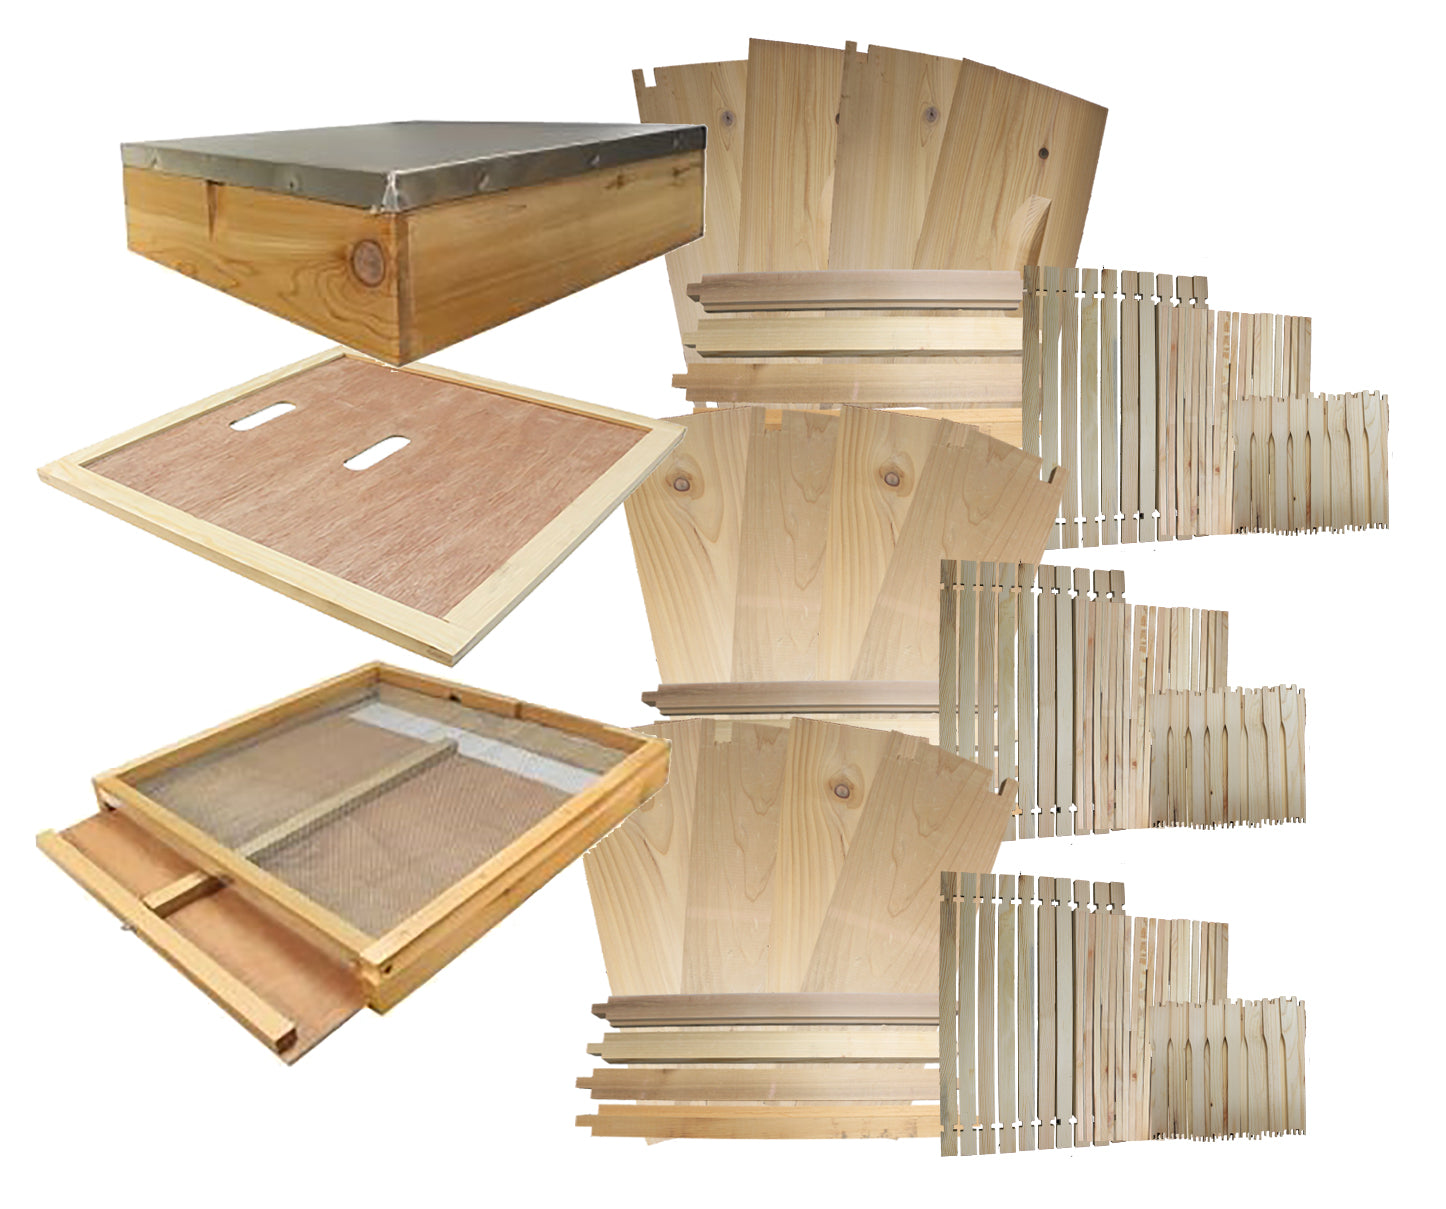 B.S. National Complete Hive Kit, Flat, Cedar, With Plastic Foundation - Bee Equipment